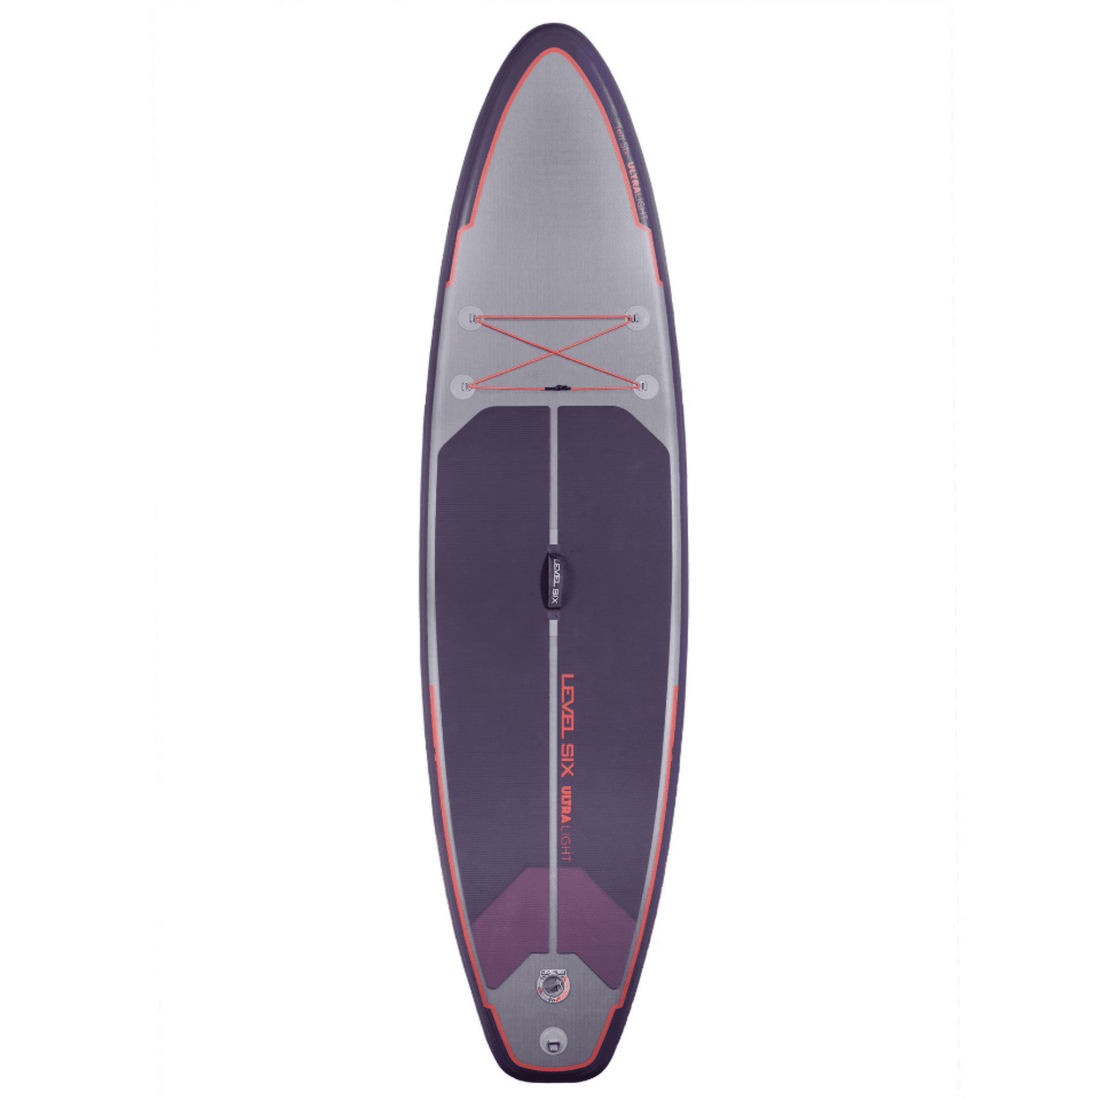 Ottawa Valley Air Paddle Byzantine Ten Six Ultralight Inflatable SUP Board